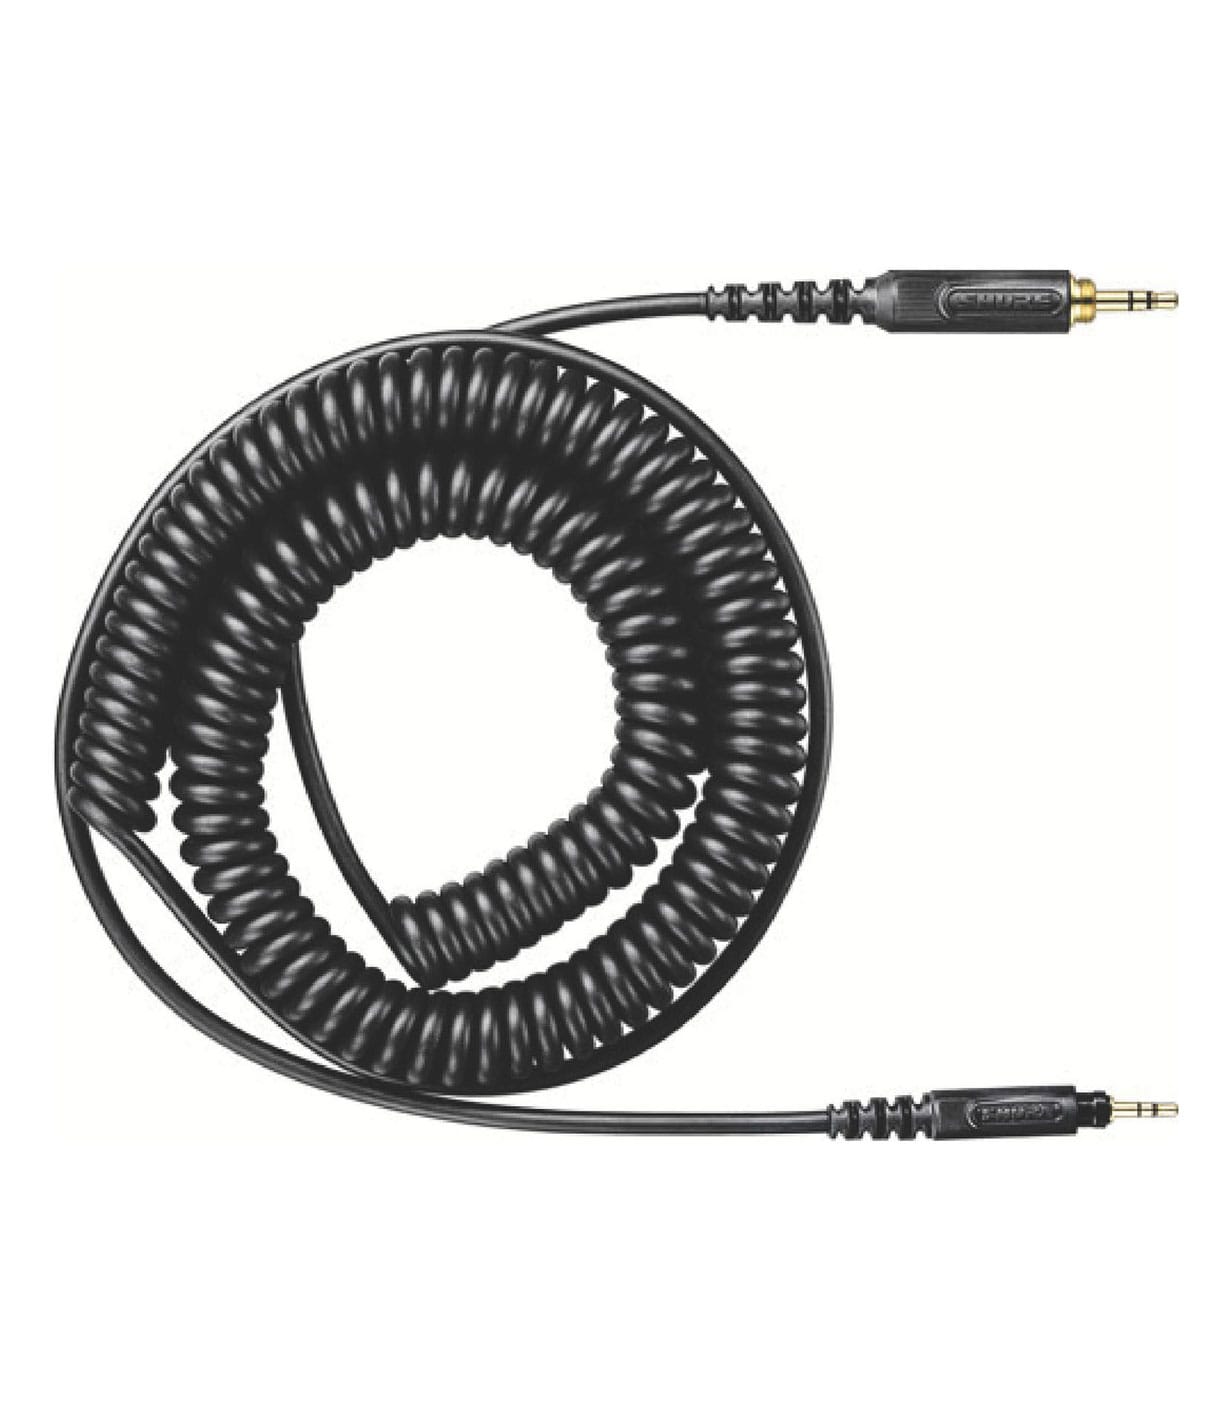 buy shure hpaca1 coiled replacement cable for shure headphon